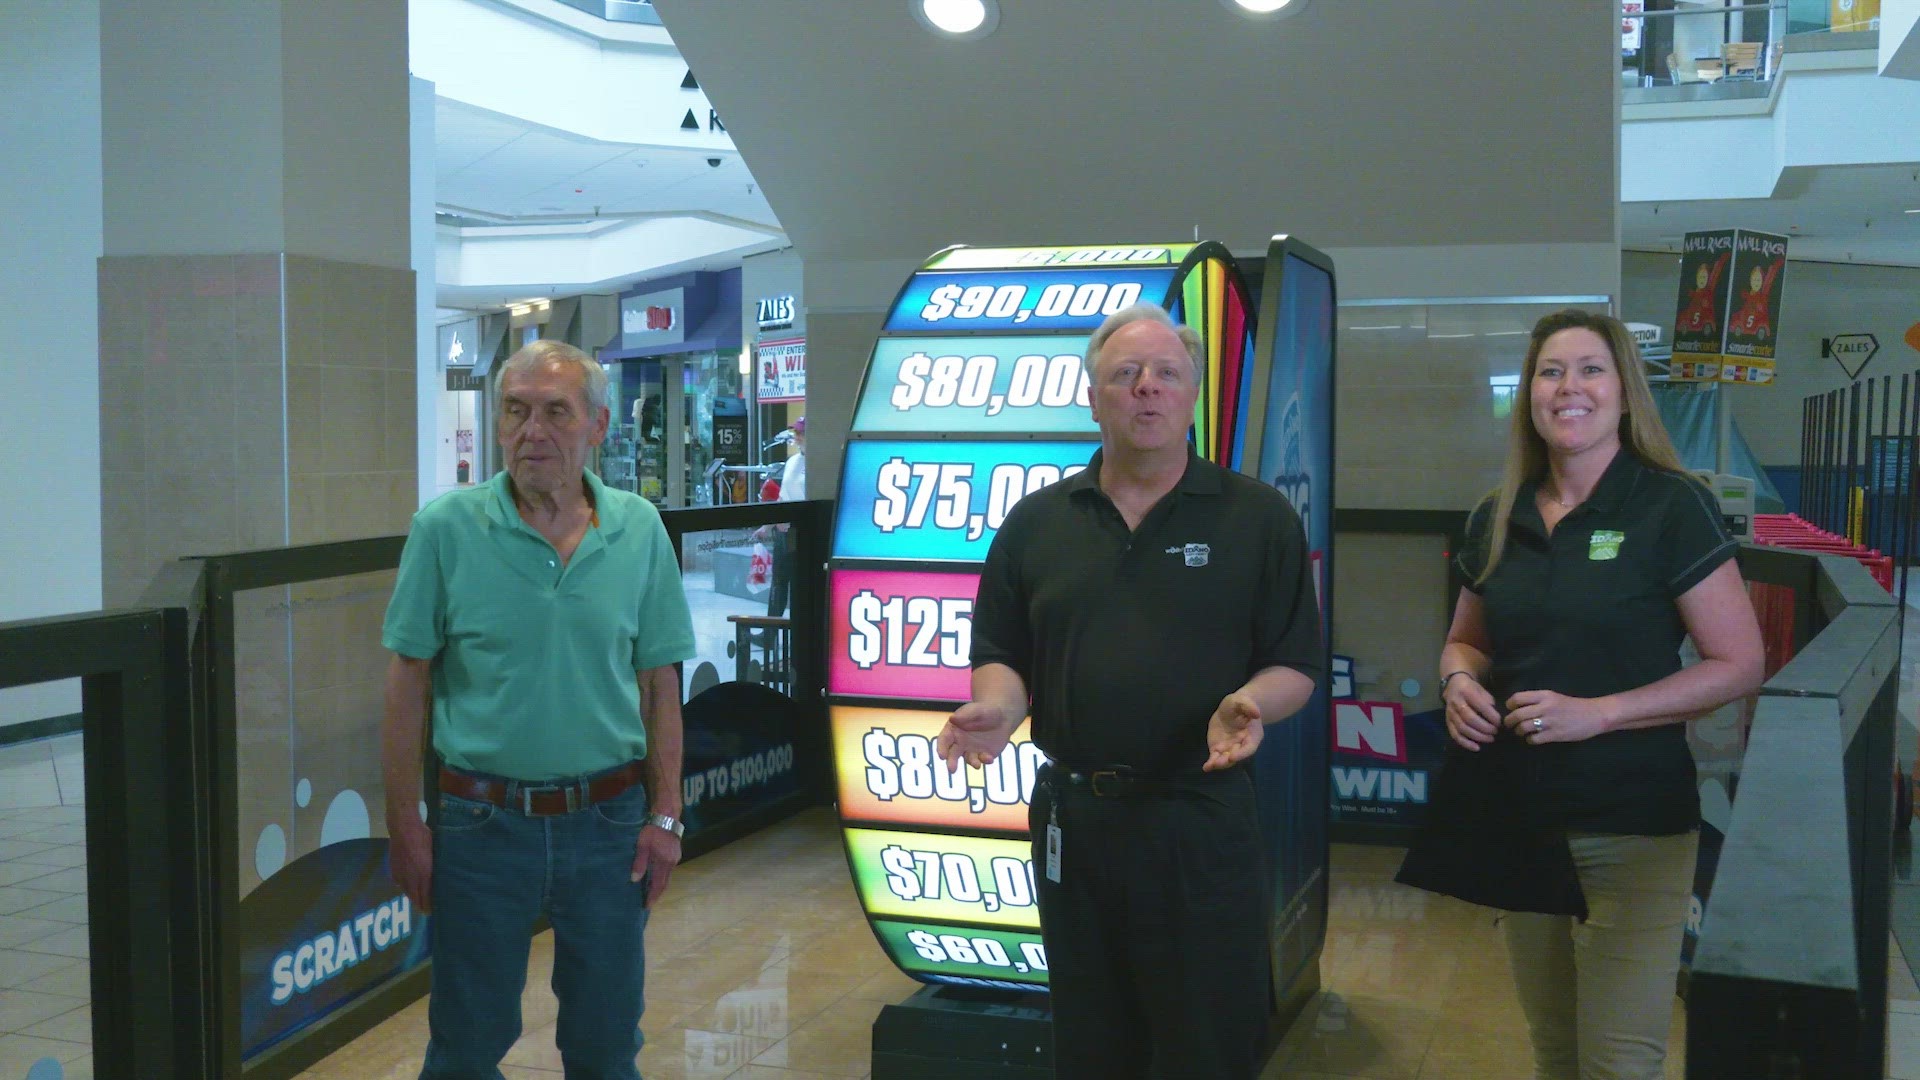 Dennis Bell from Filer hits the jackpot - making him the largest winner in the history of the game.